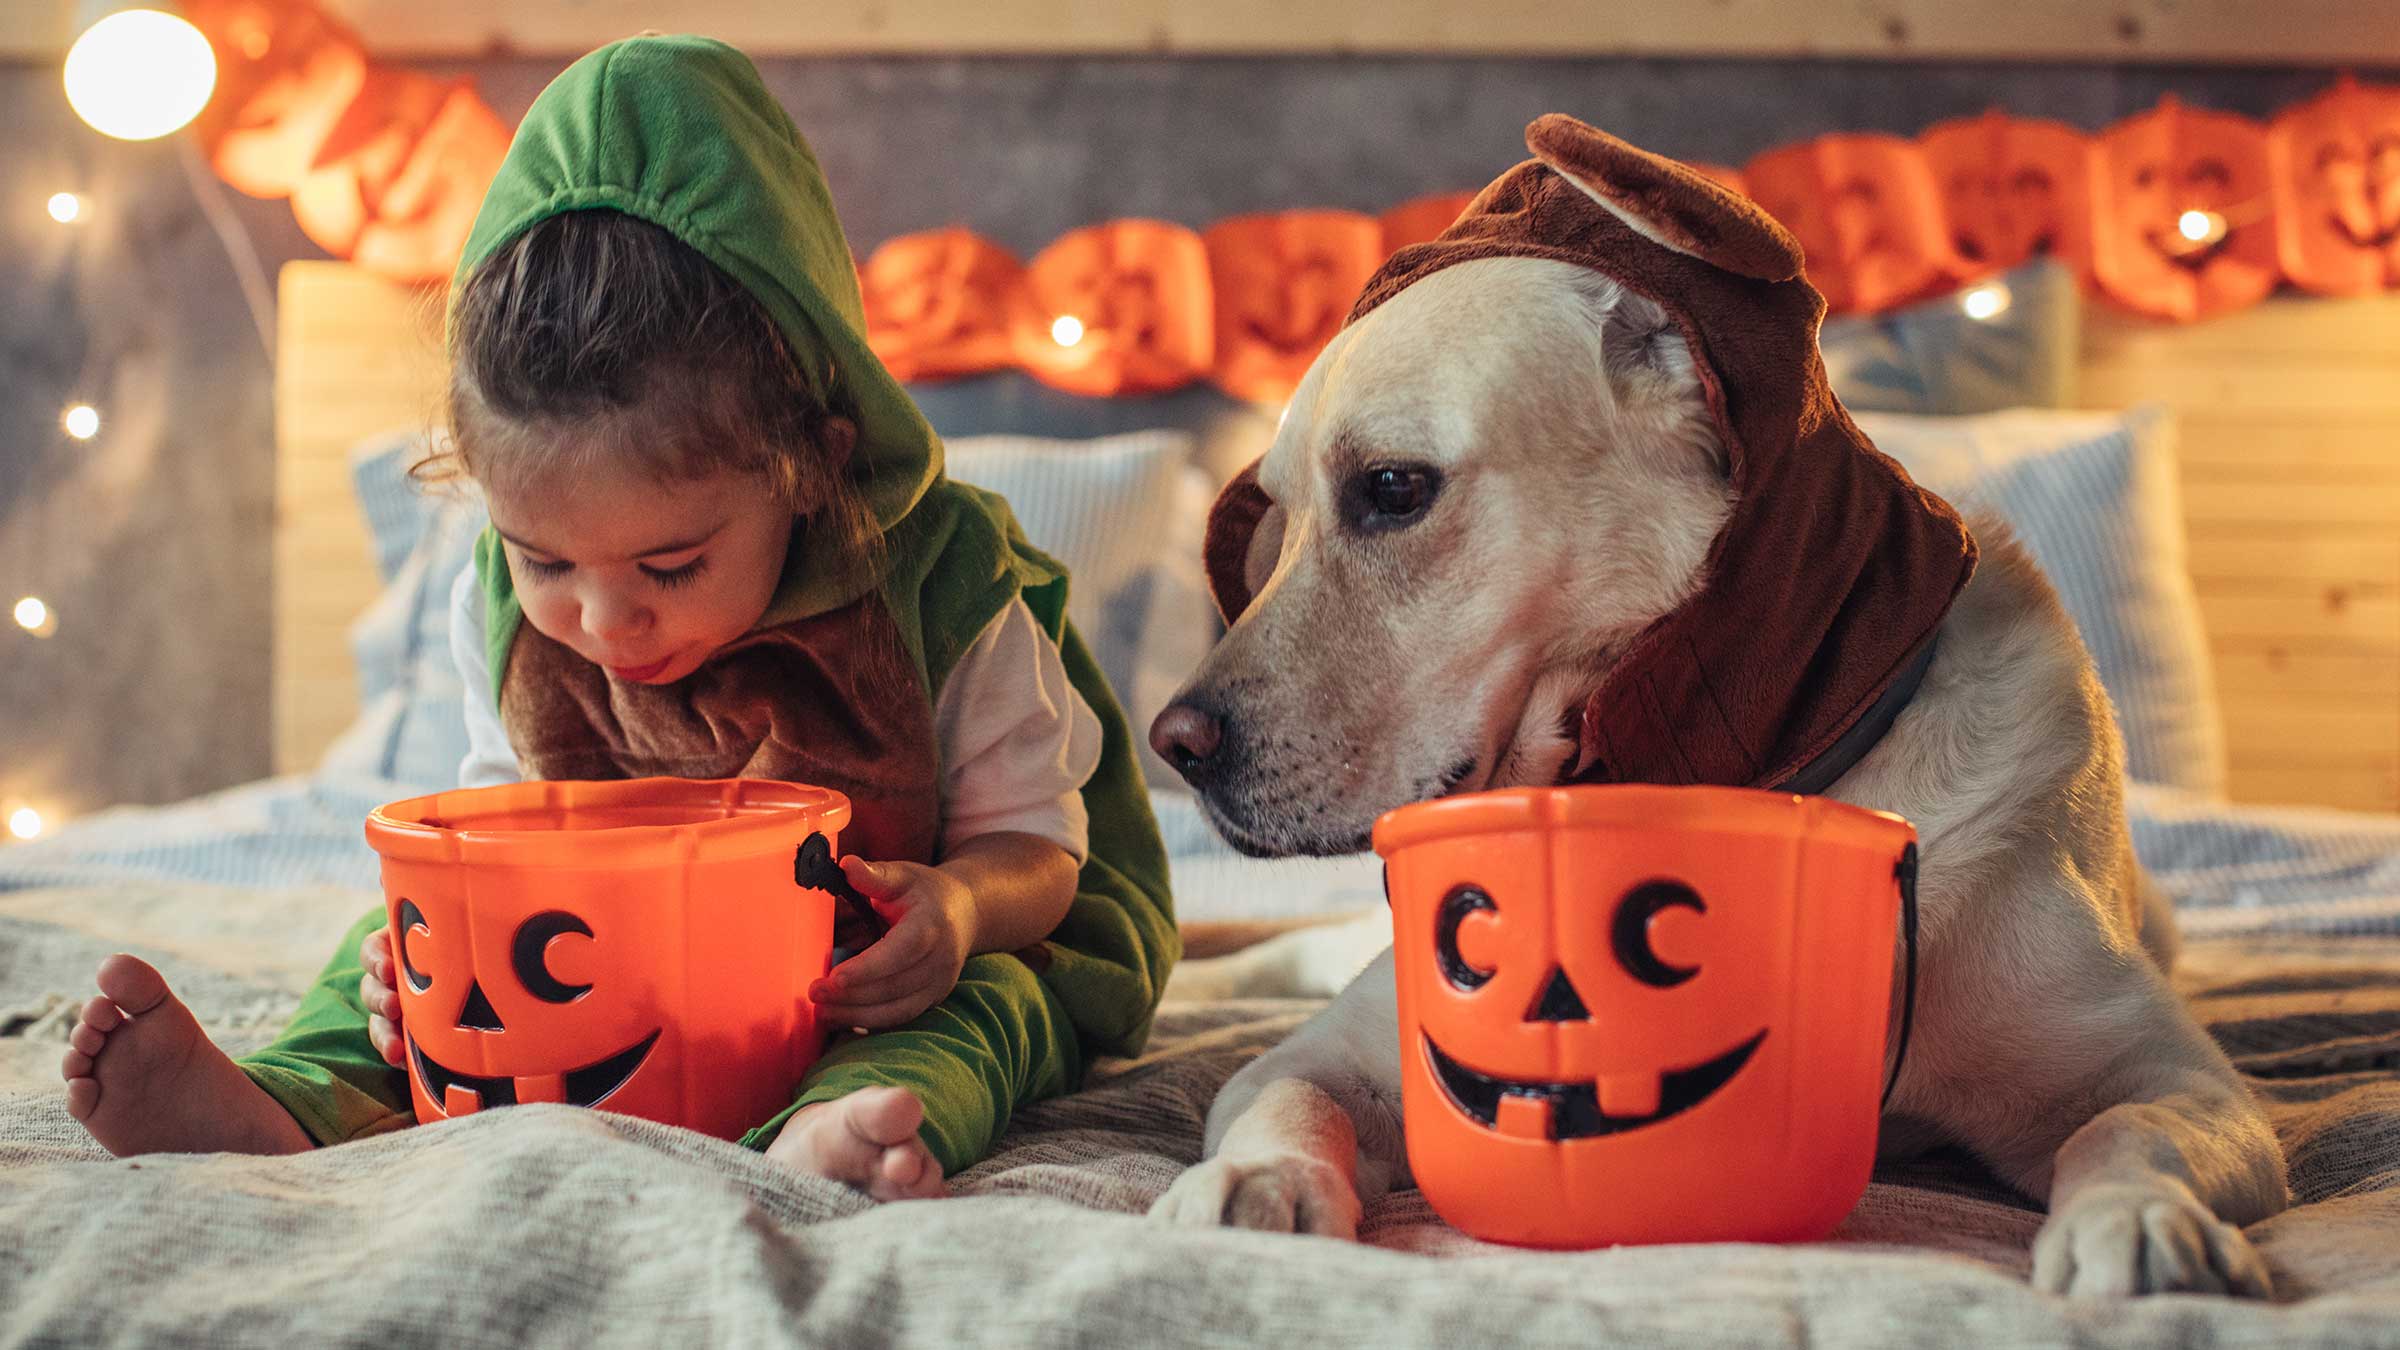 A young child and their dog sitting on a bed in Halloween costumes